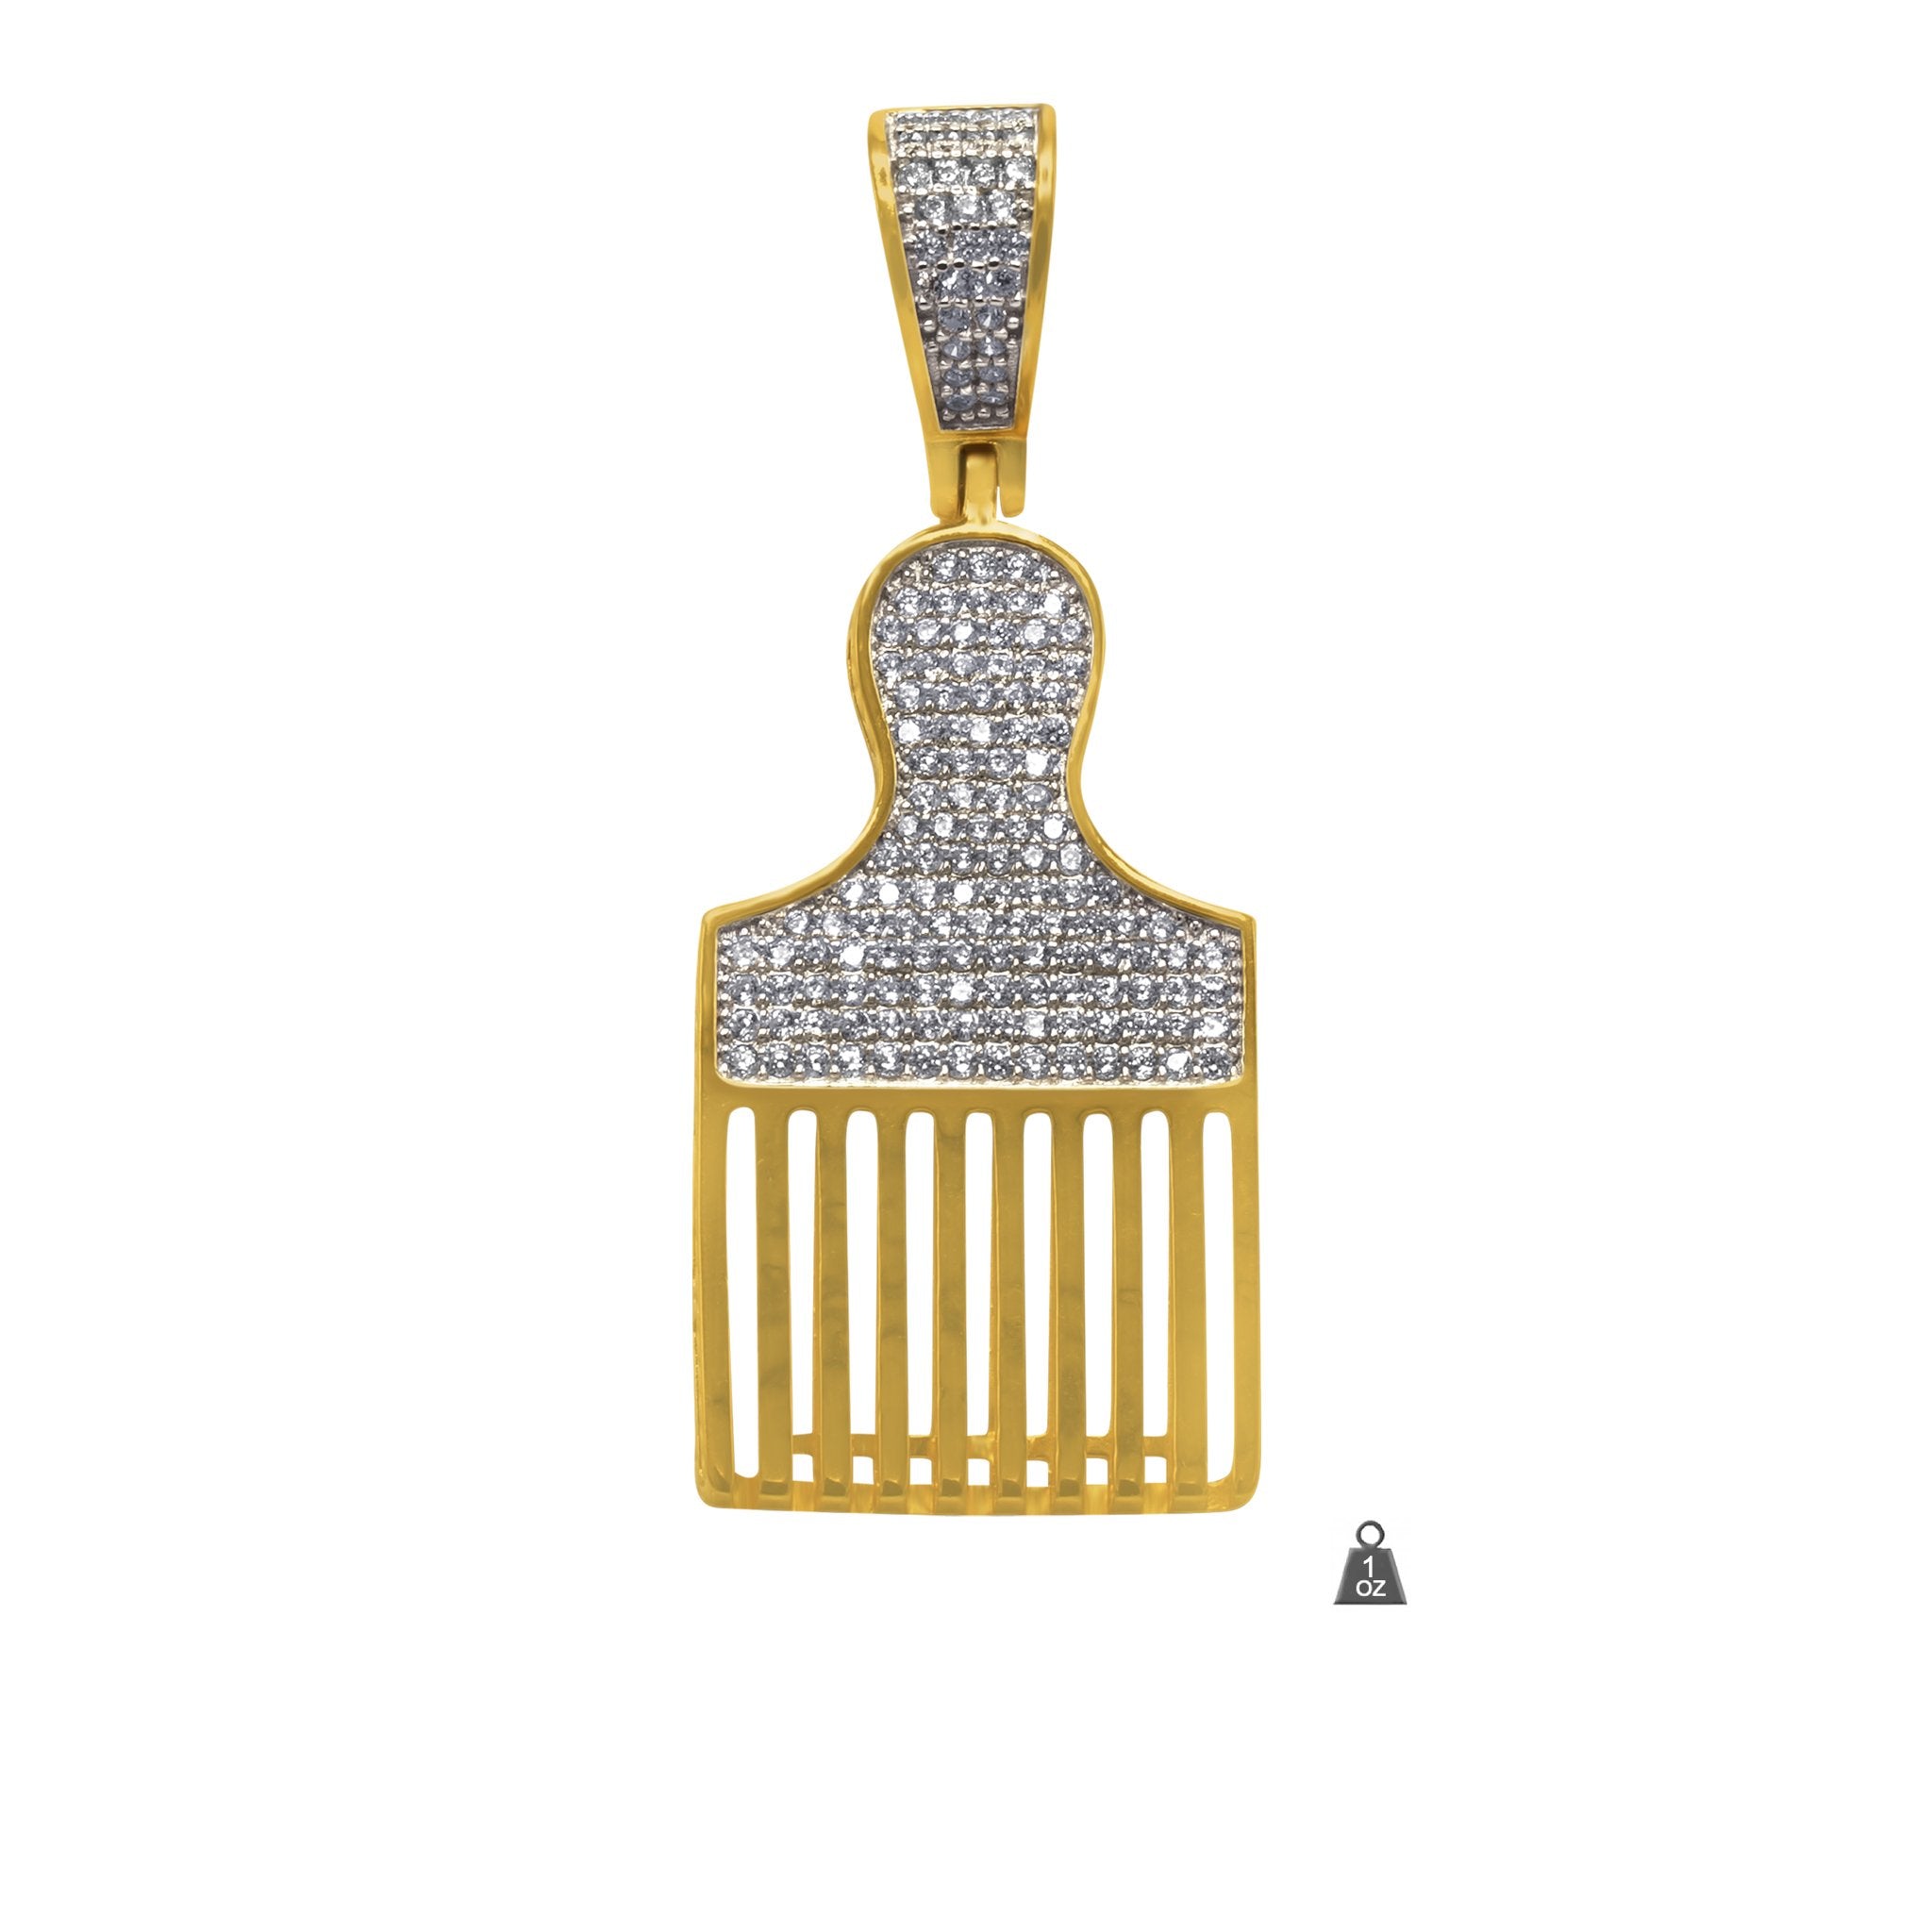 Afro Comb 928062